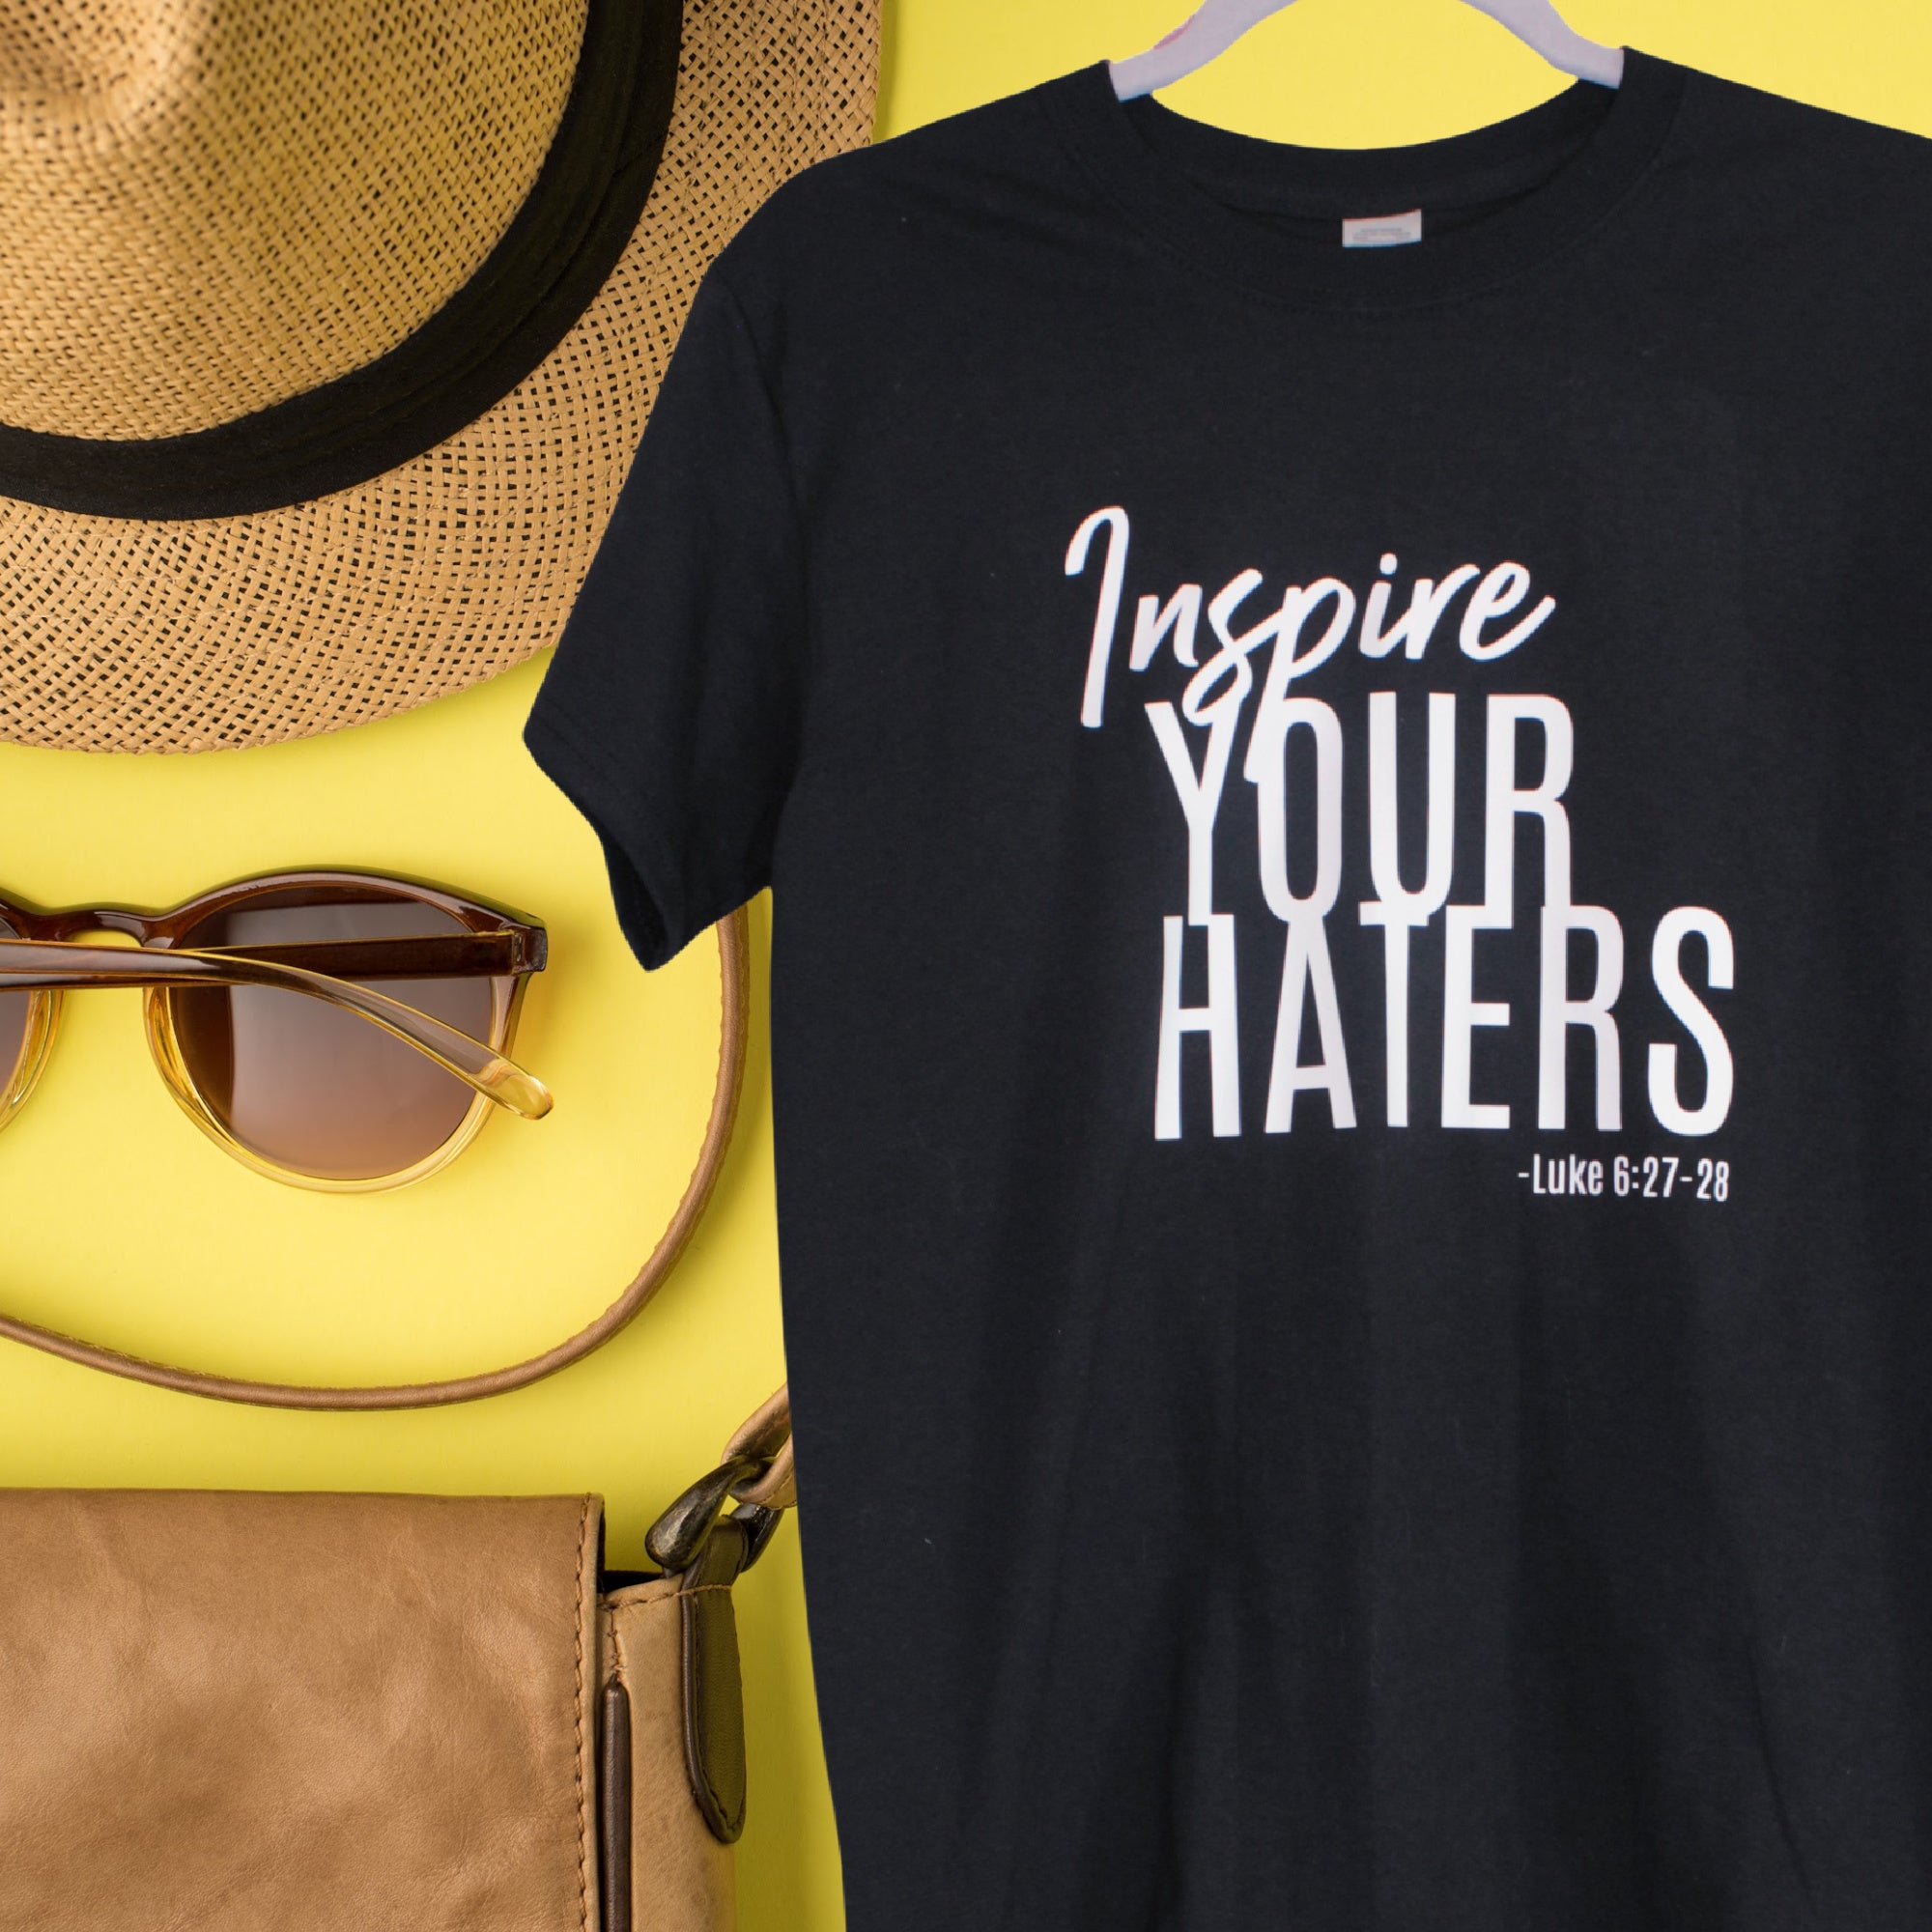 "INSPIRE YOUR HATERS" Tee